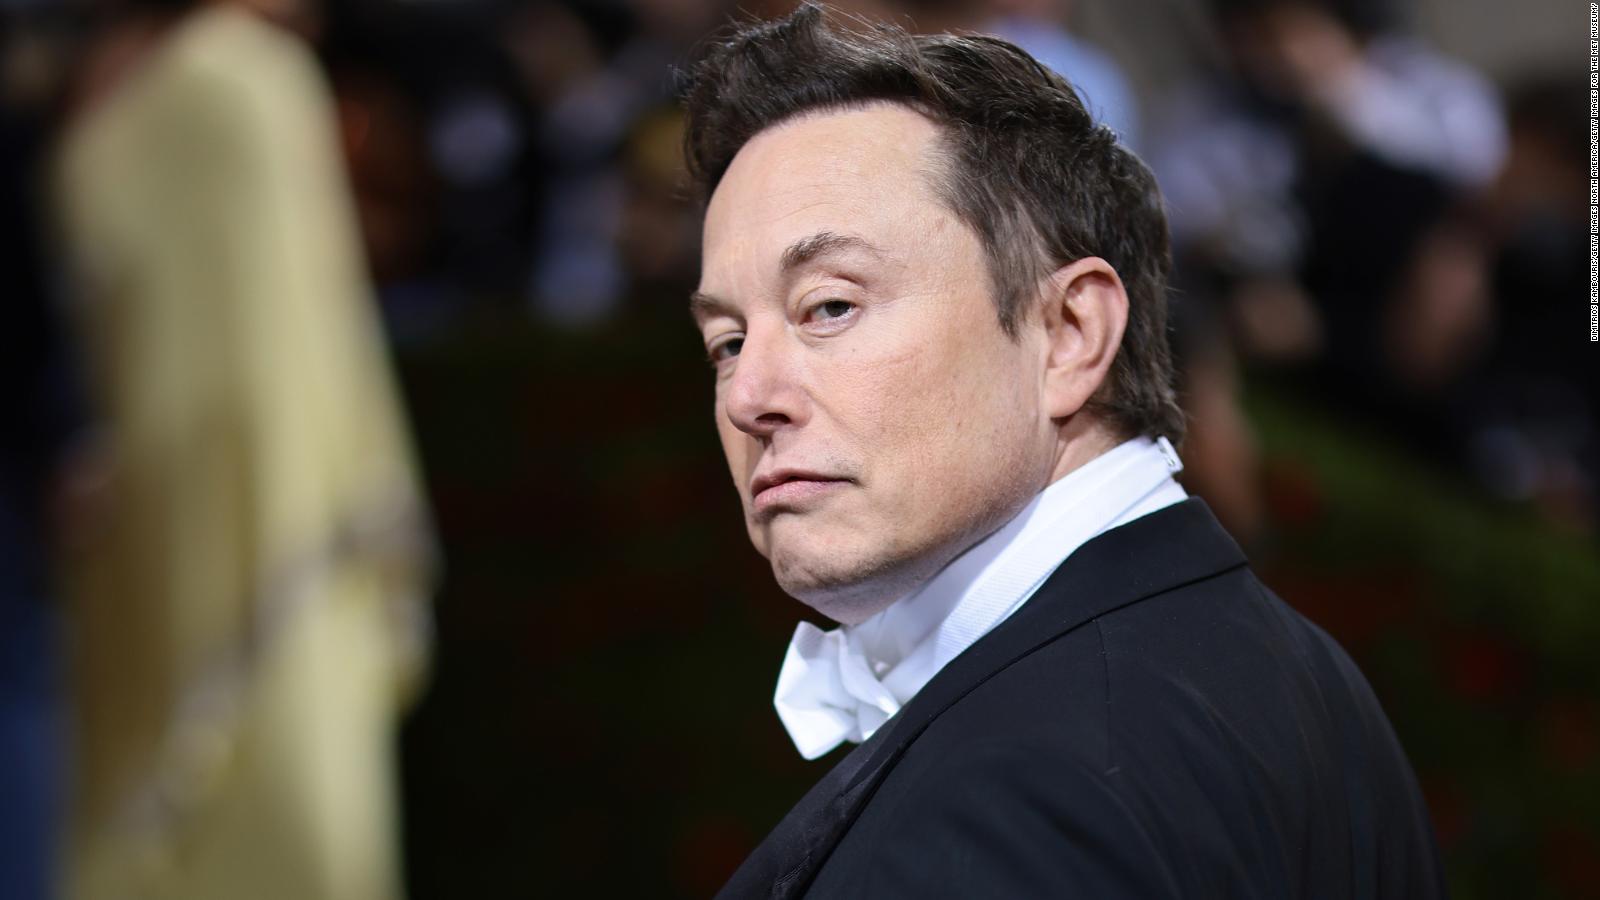 Elon Musk pushes ahead with layoffs on Twitter: What we know